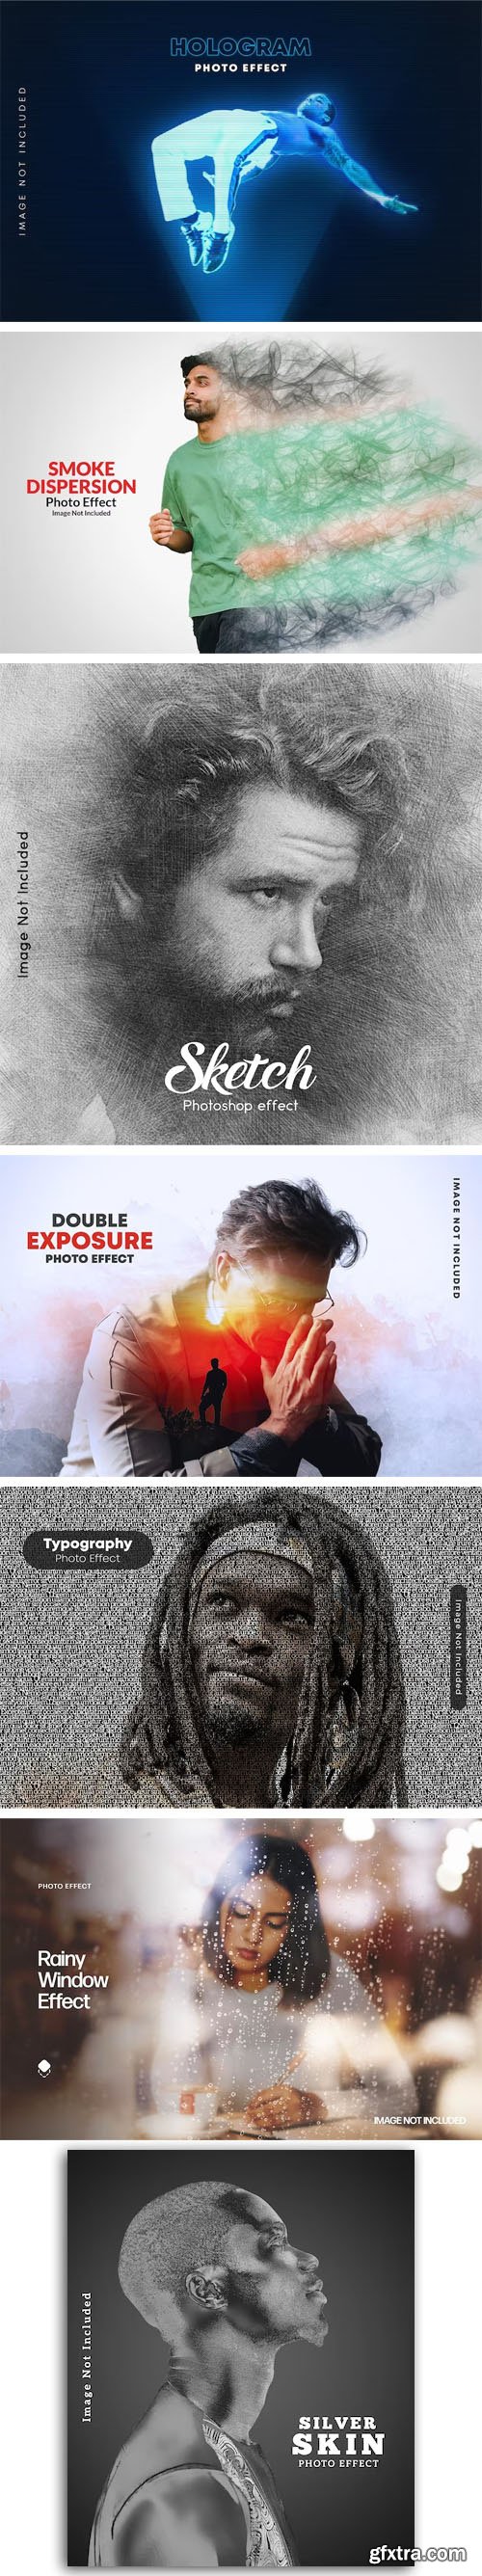 Awesome Premium Photo Effects for Photoshop [Vol.7]